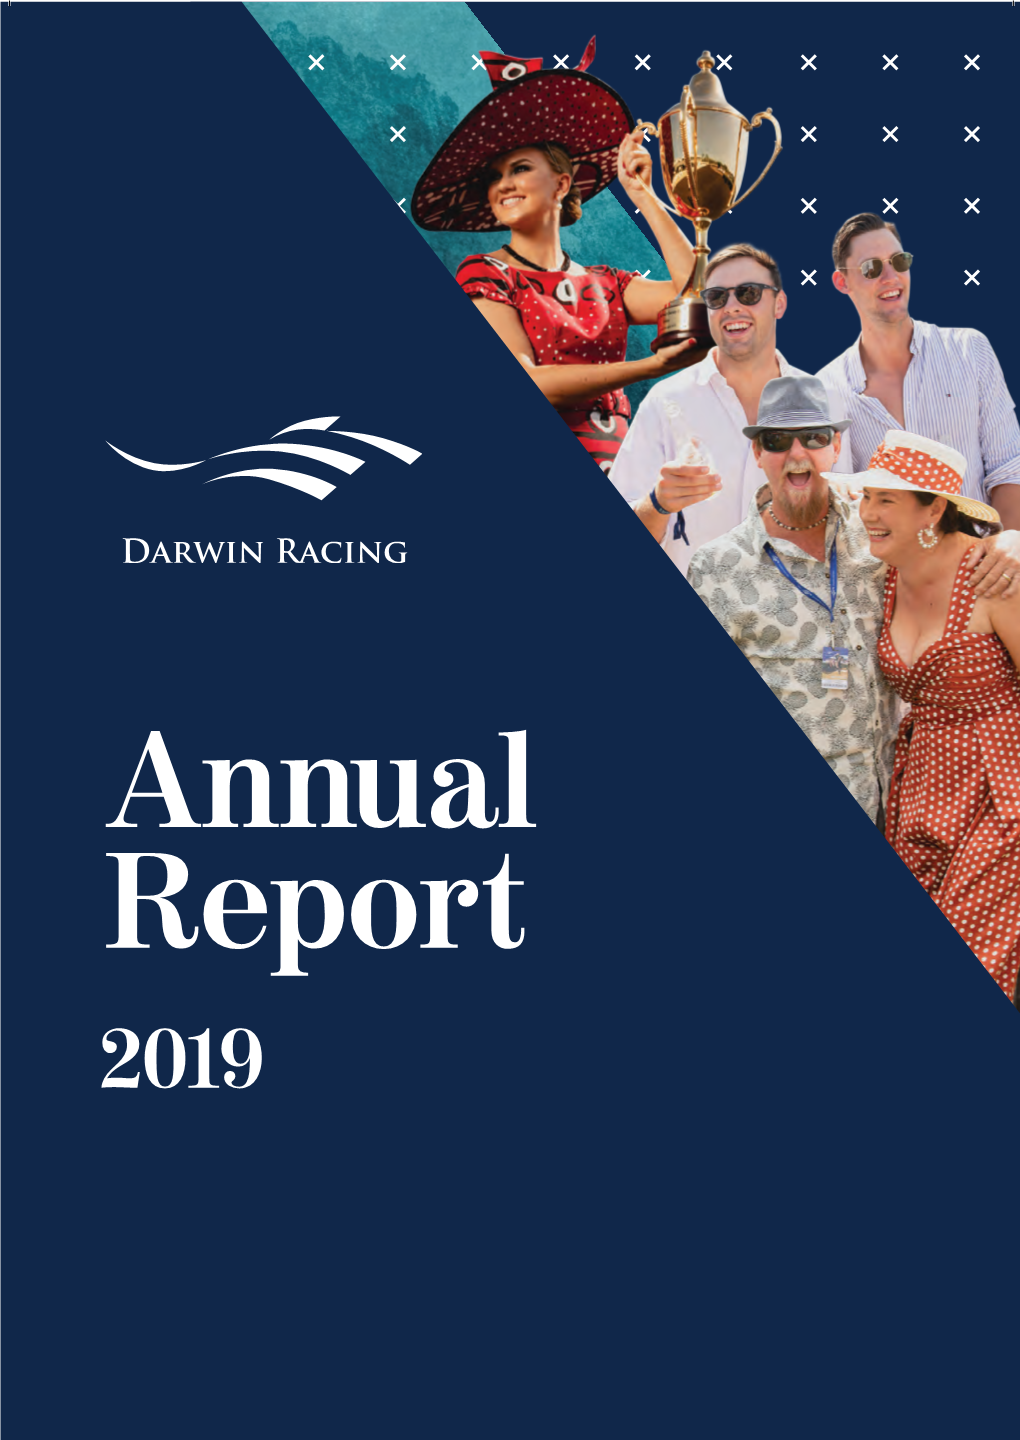 Viewed by Tens of Millions Throughout Australia and Globally Via Our Trusted and Highly Valued Media Partner SKY Racing Across the Eight Days of Racing